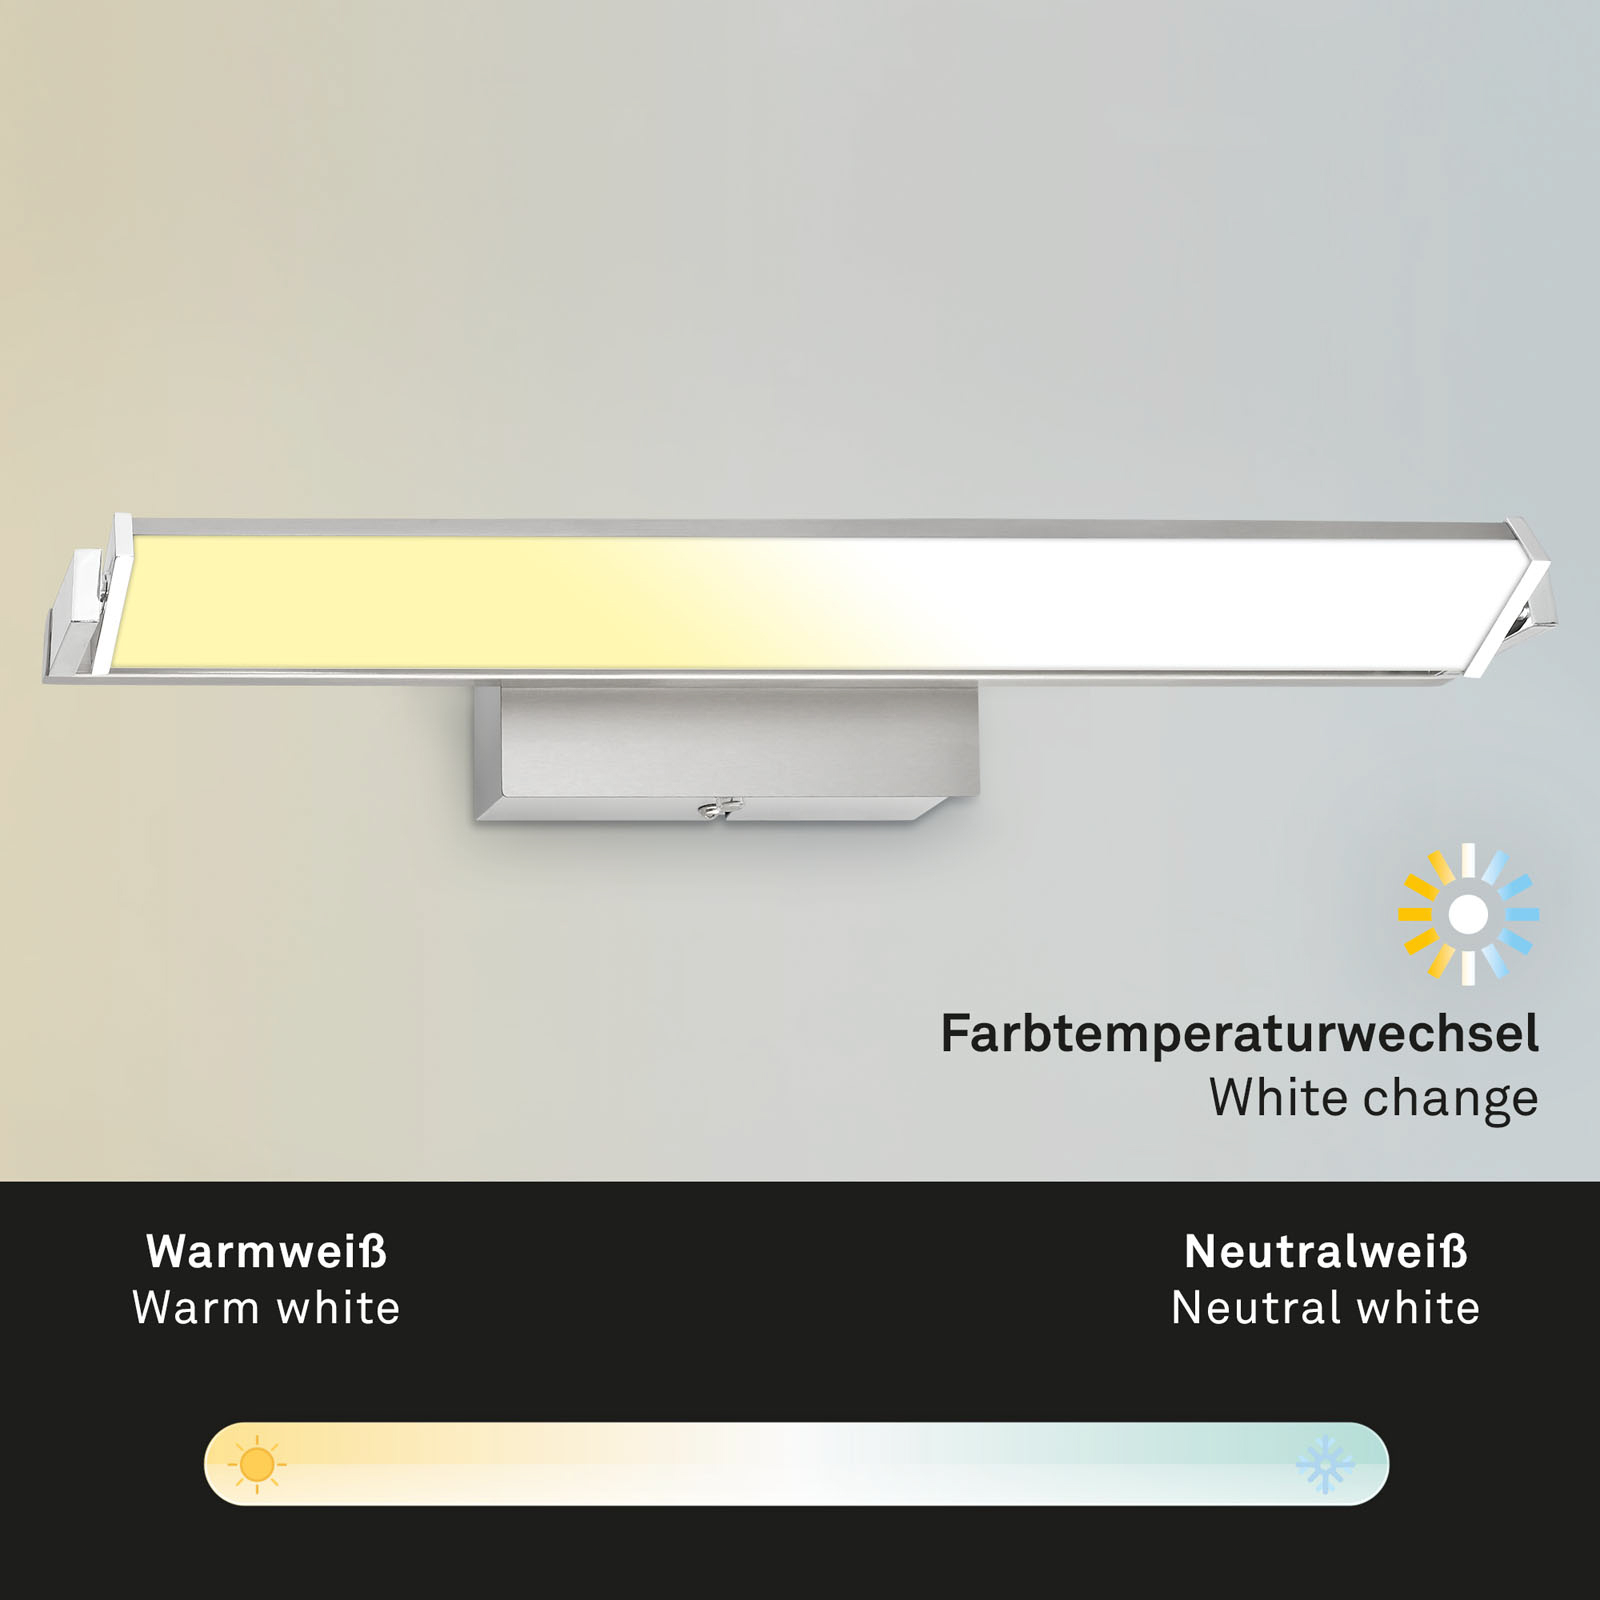 LED wall light Udonga, swivelling, CCT, dimmable, nickel